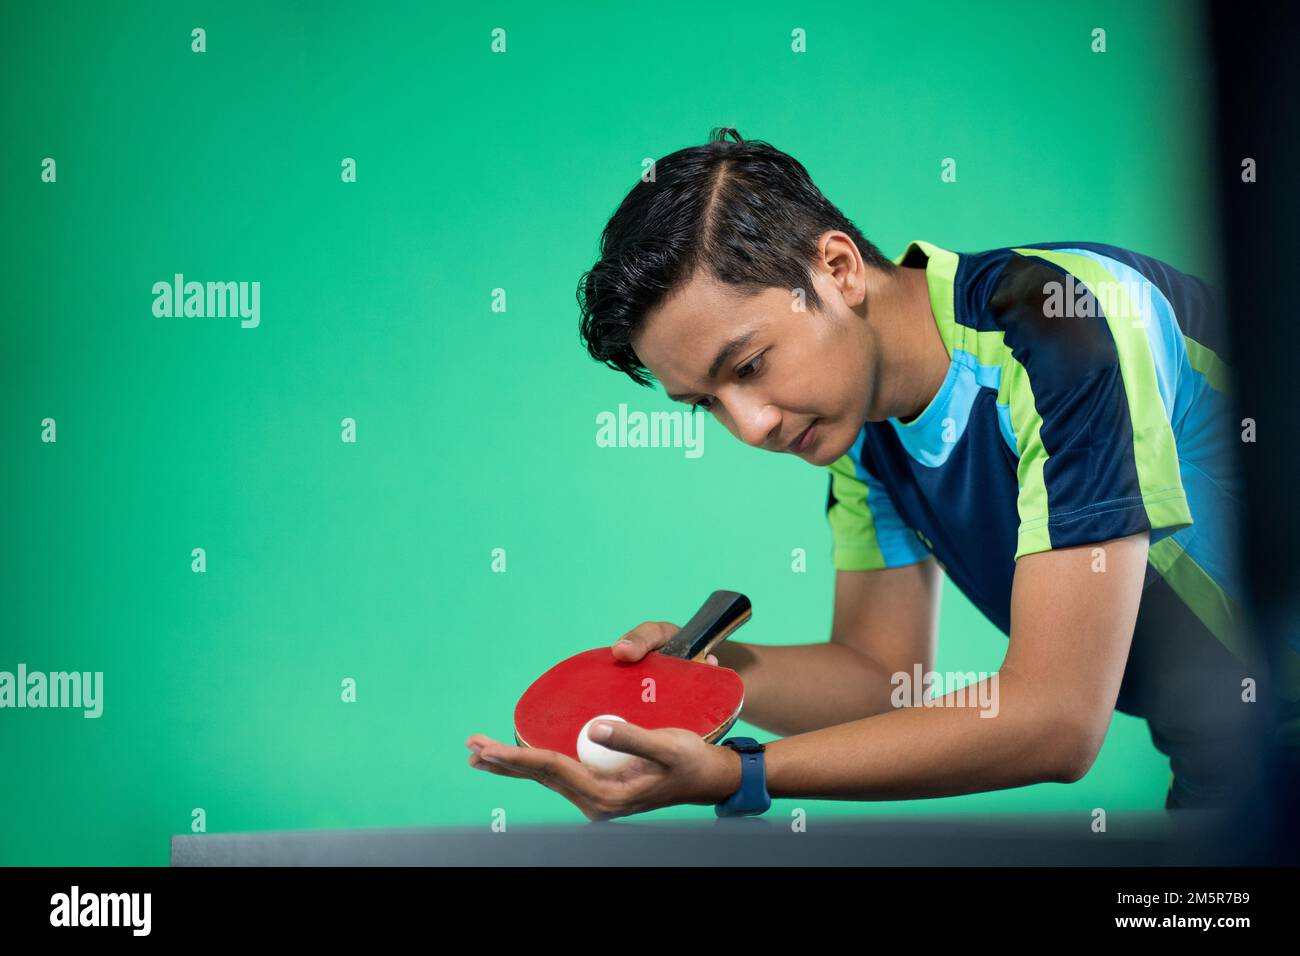 Asian athlete ready to serve during a ping pong match Stock Photo